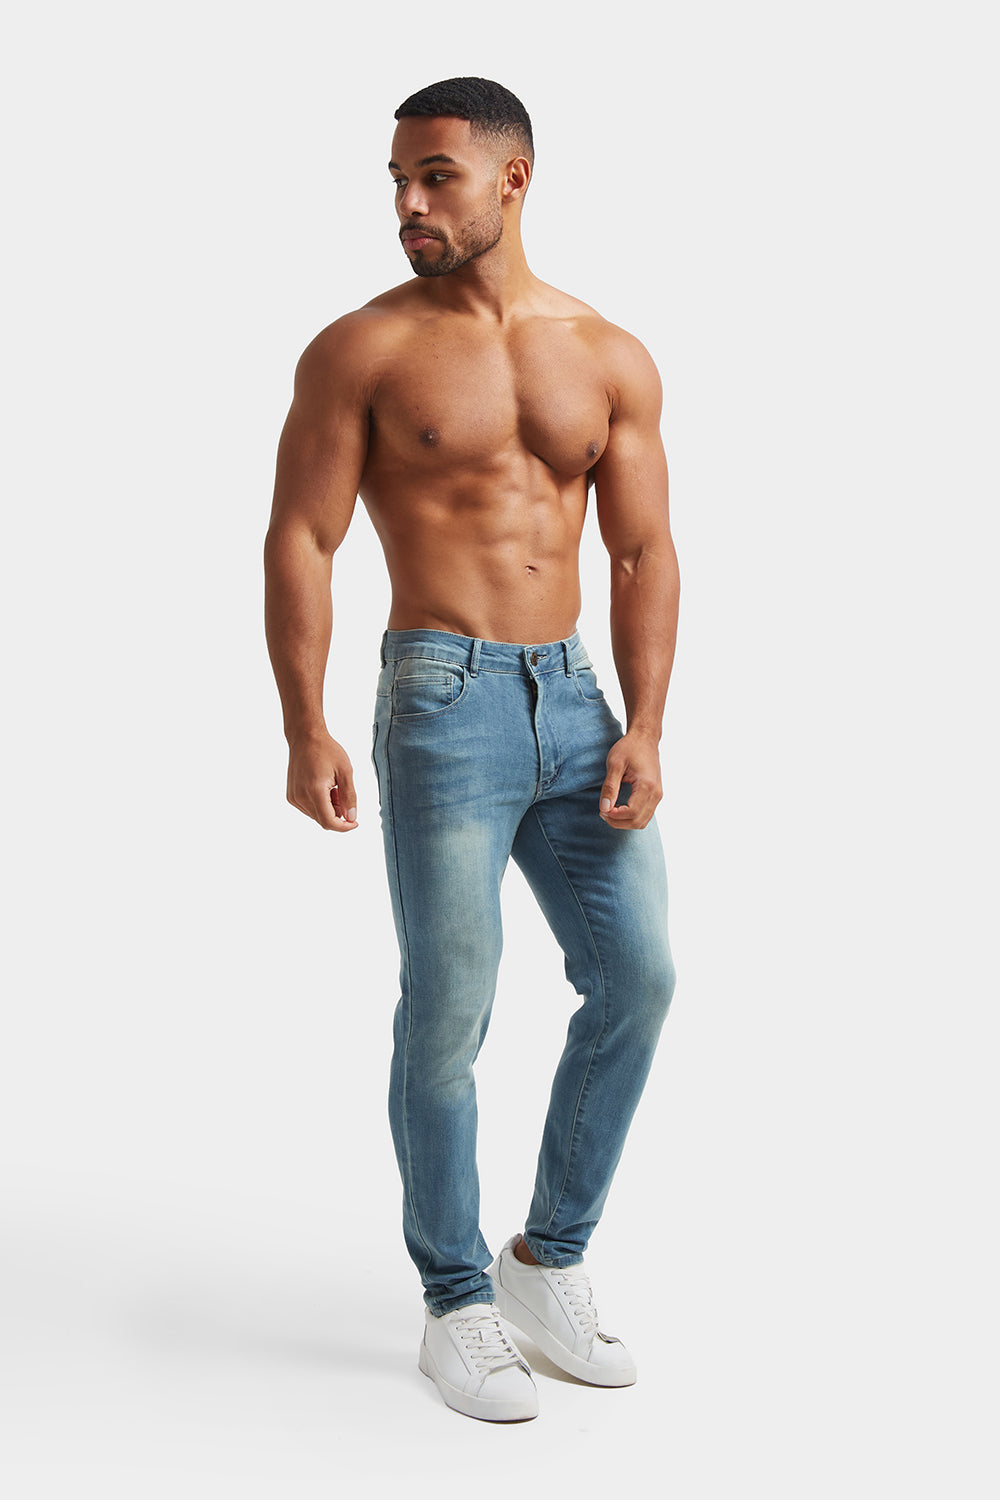 What Are Athletic Fit Jeans? (And How to Wear Them)